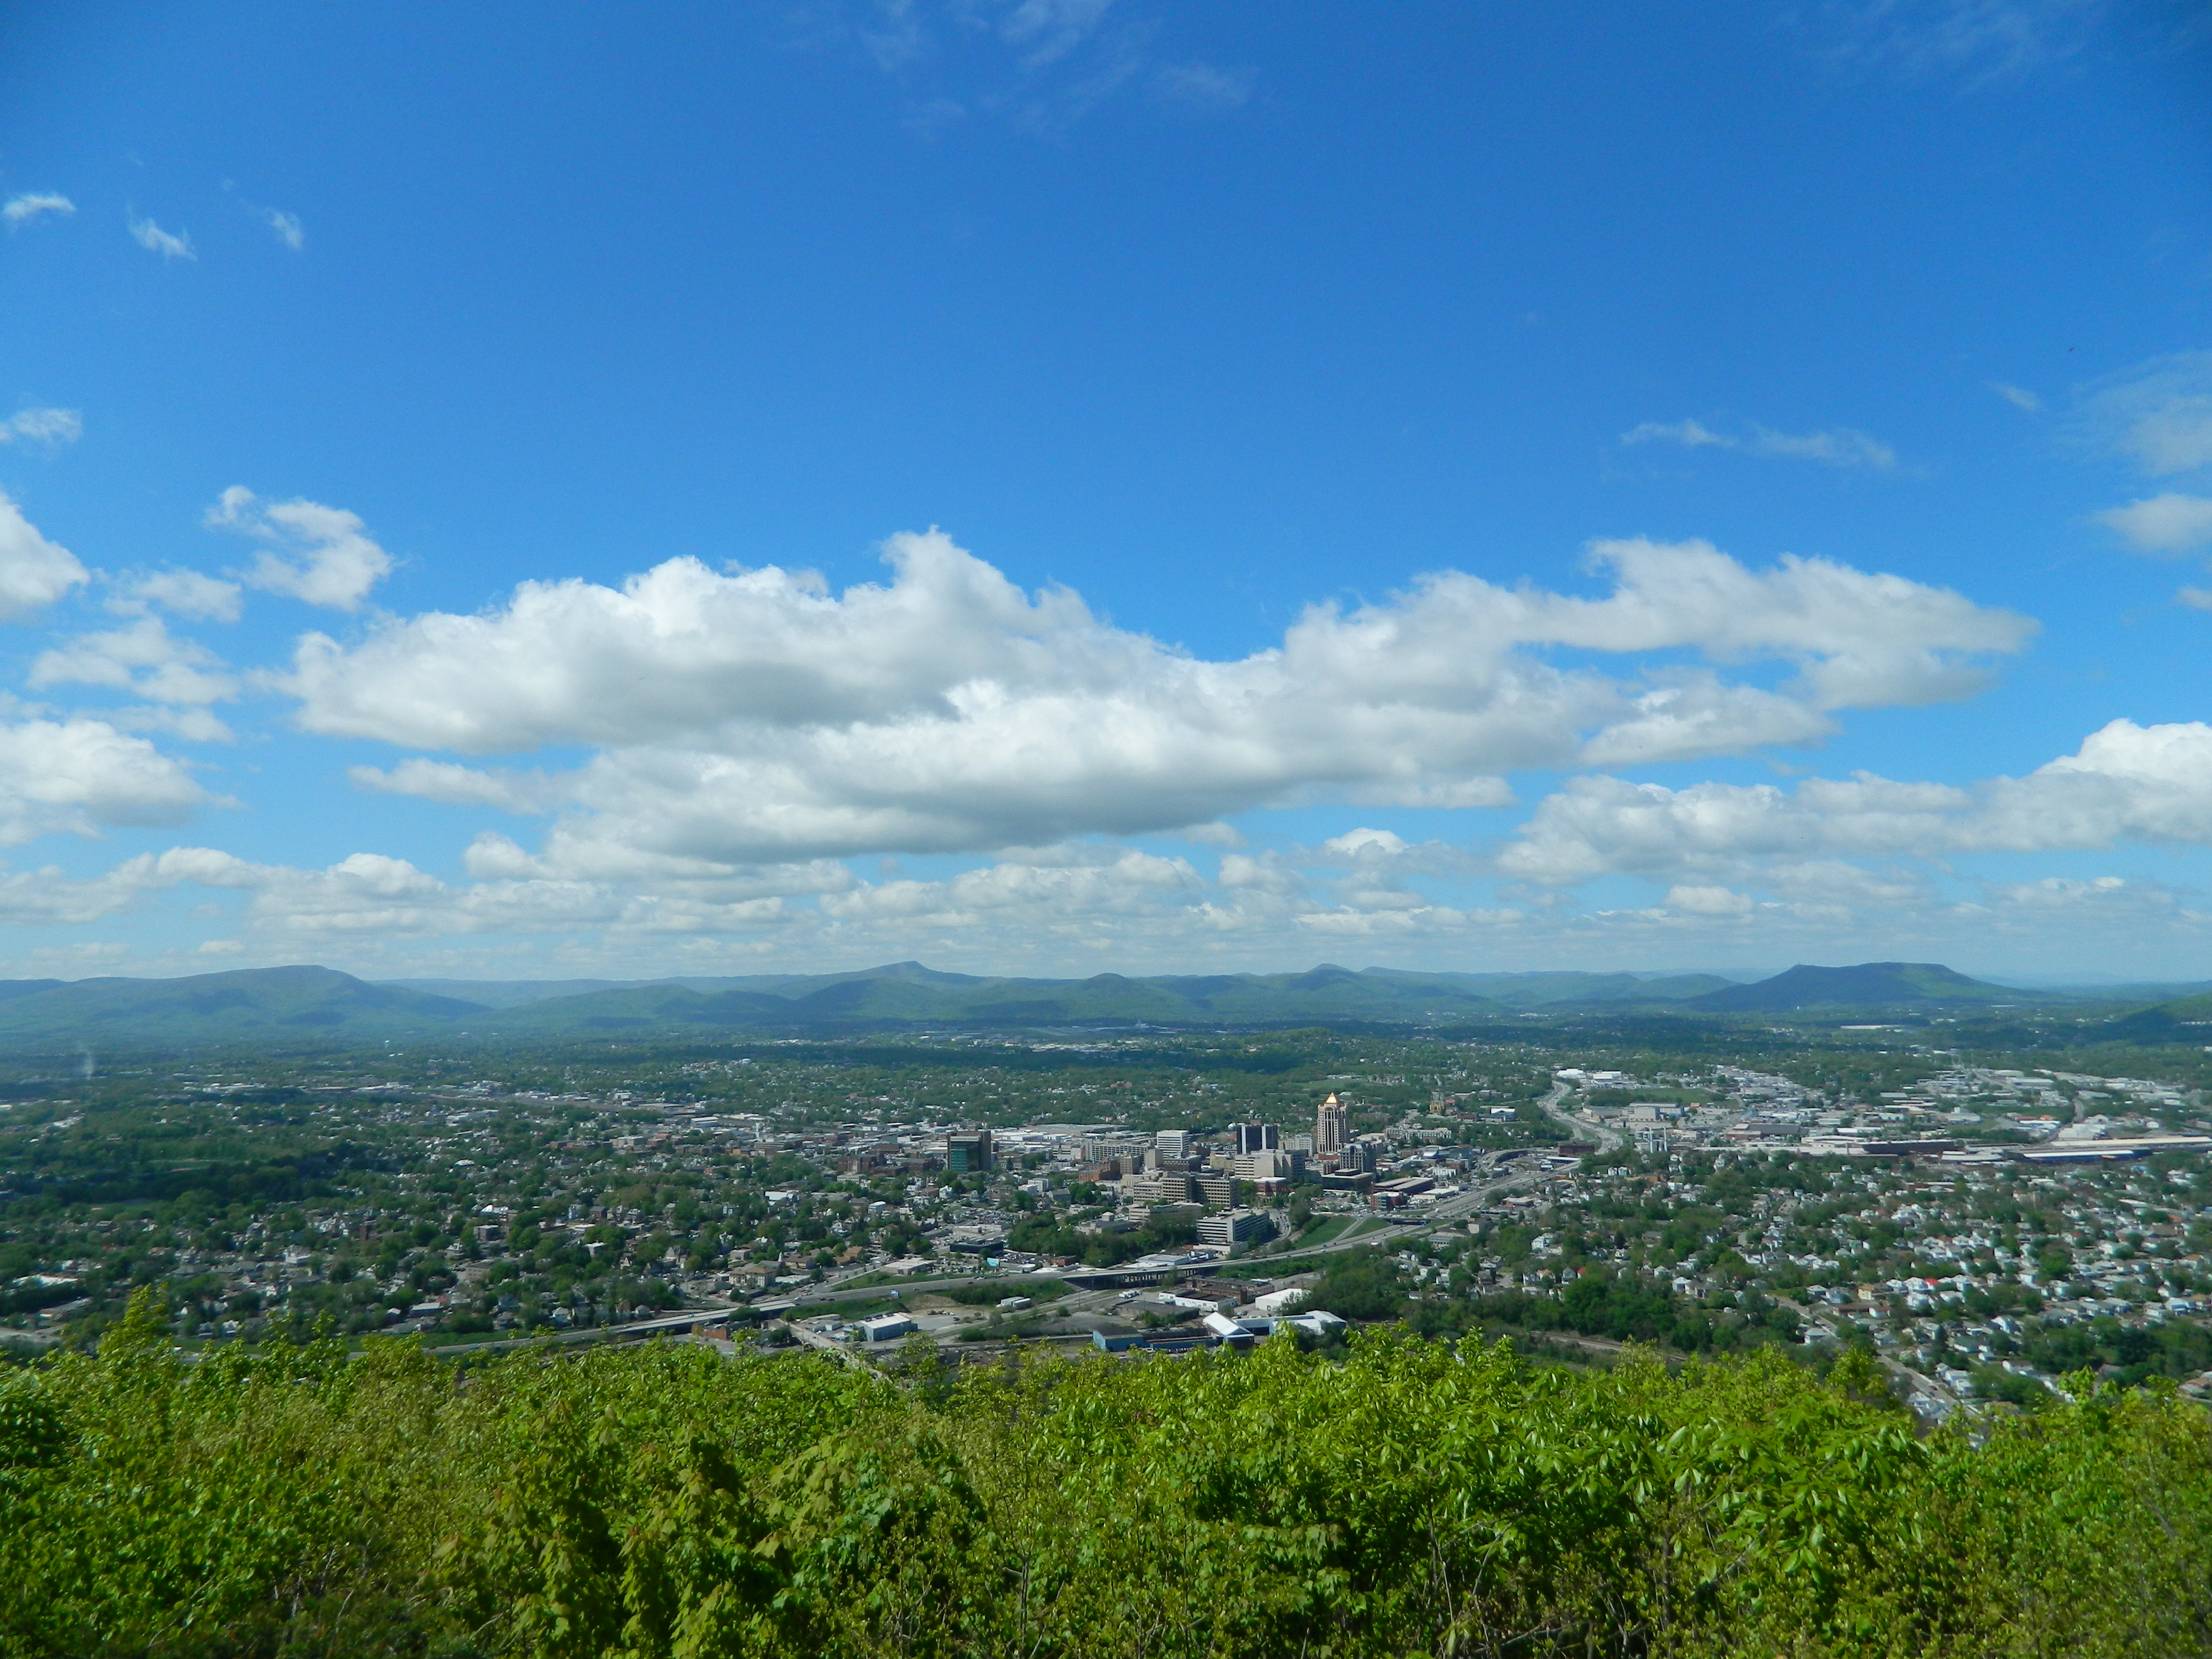 View of the neighboring Virginia valley from the mountains - definitely not a bad place to spend summer vacations. 